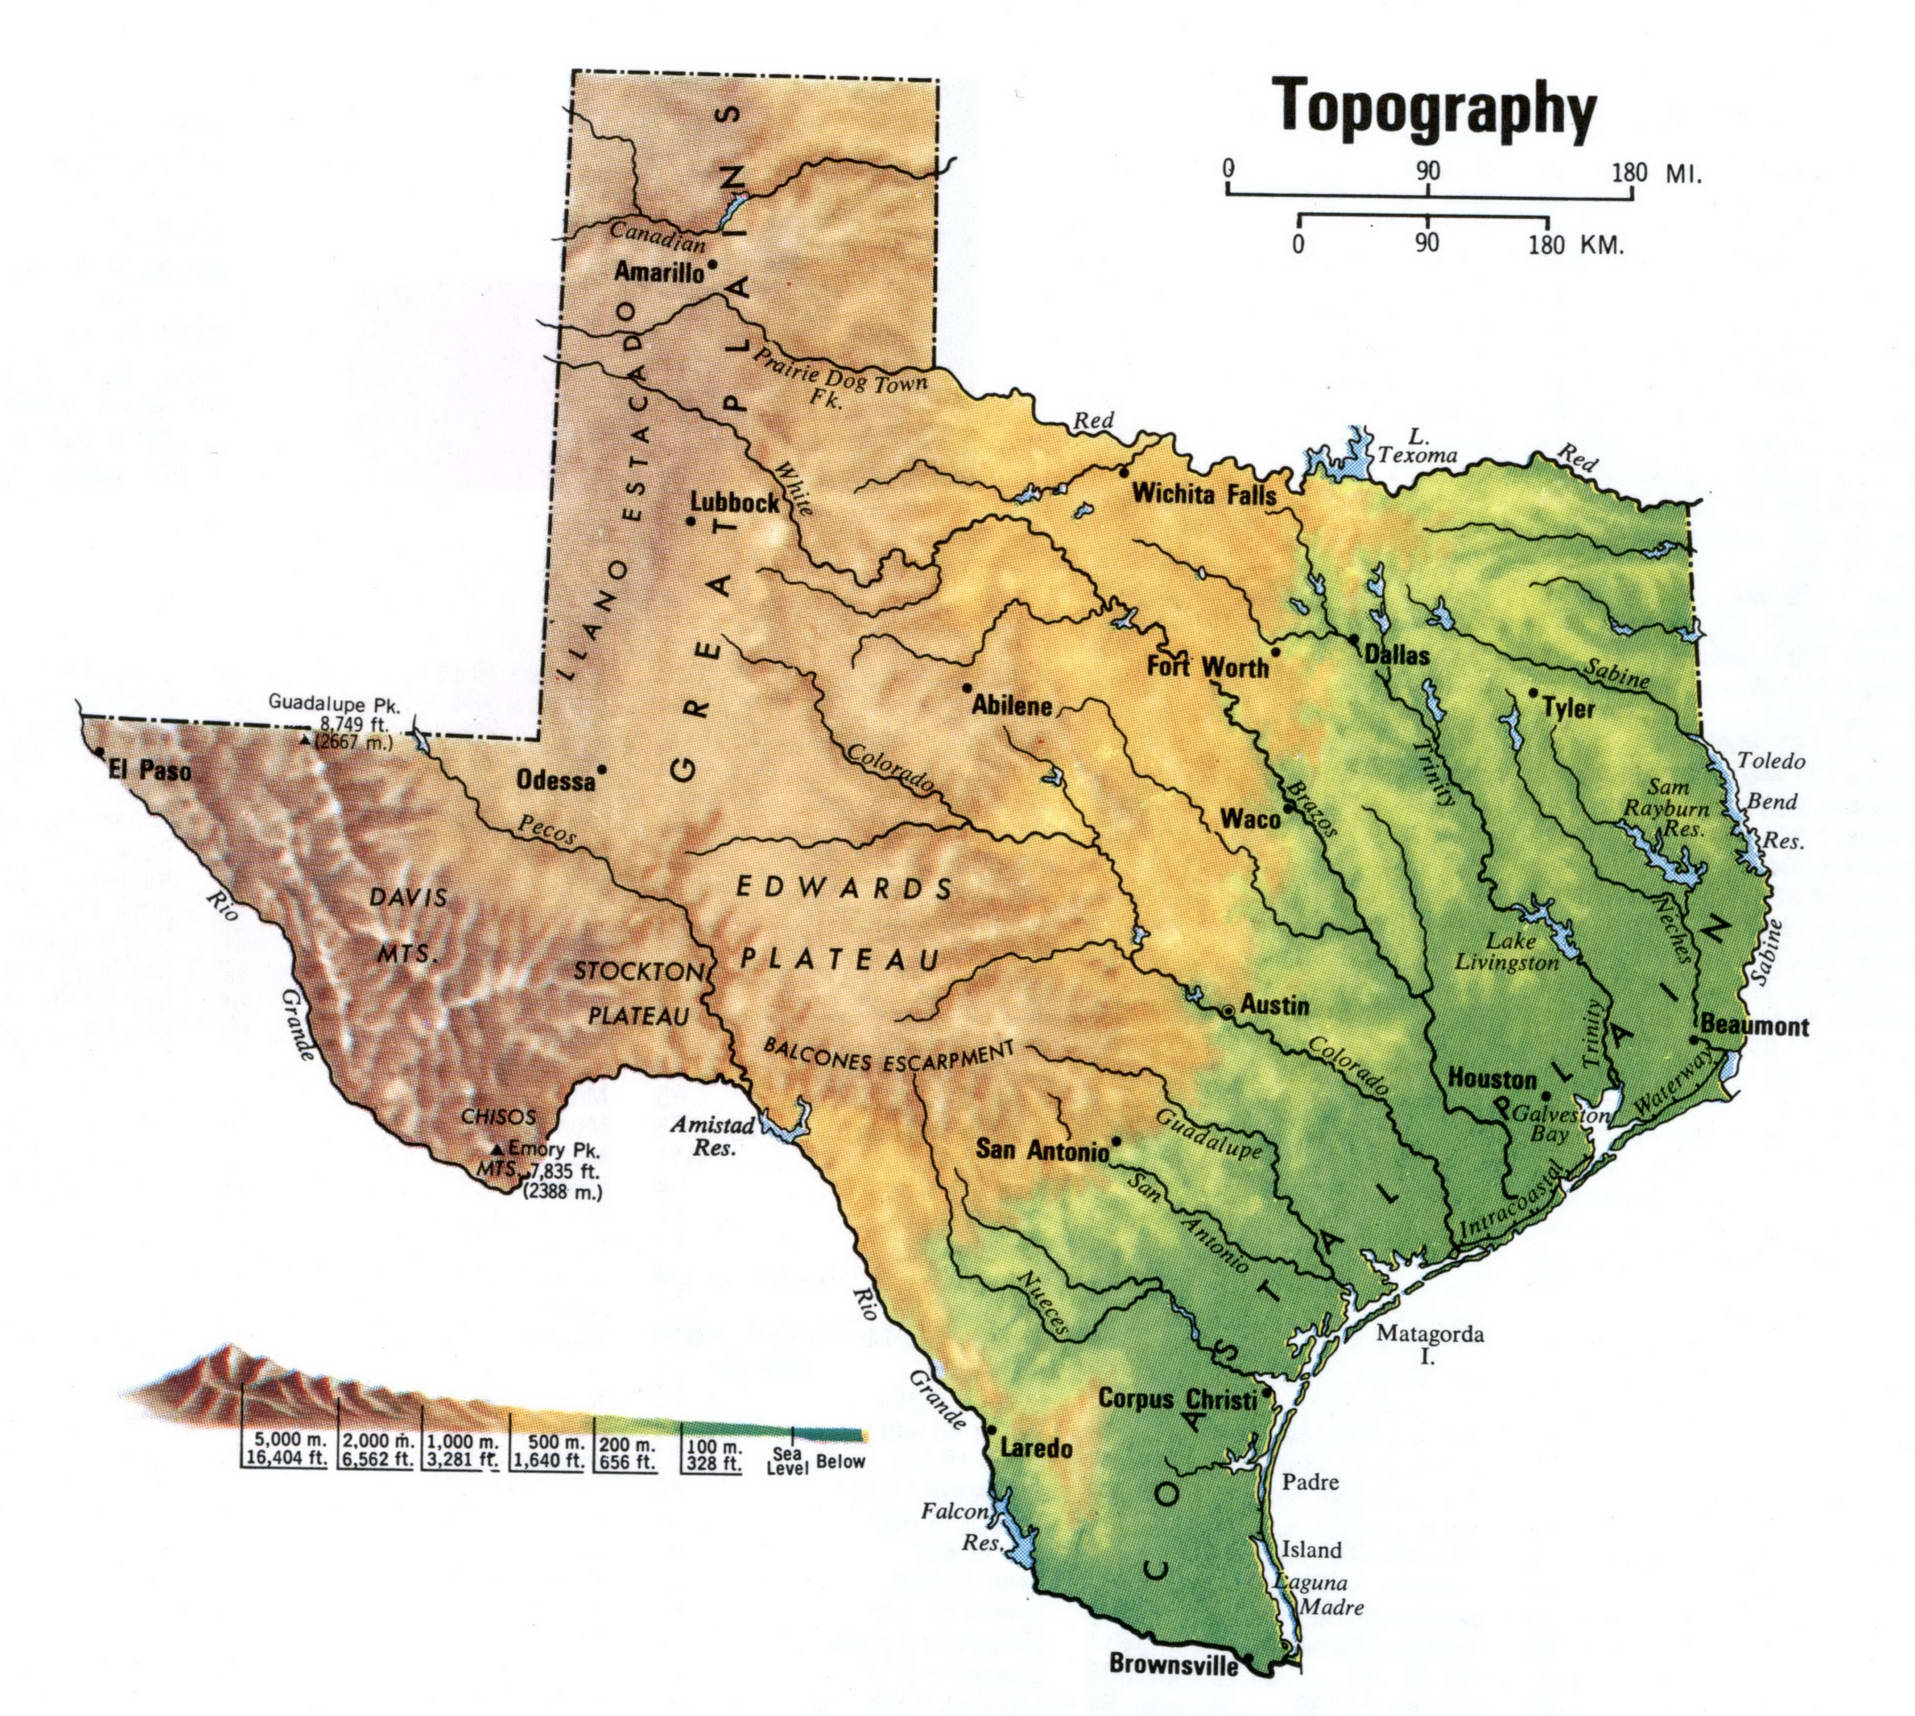 Texas topographical map